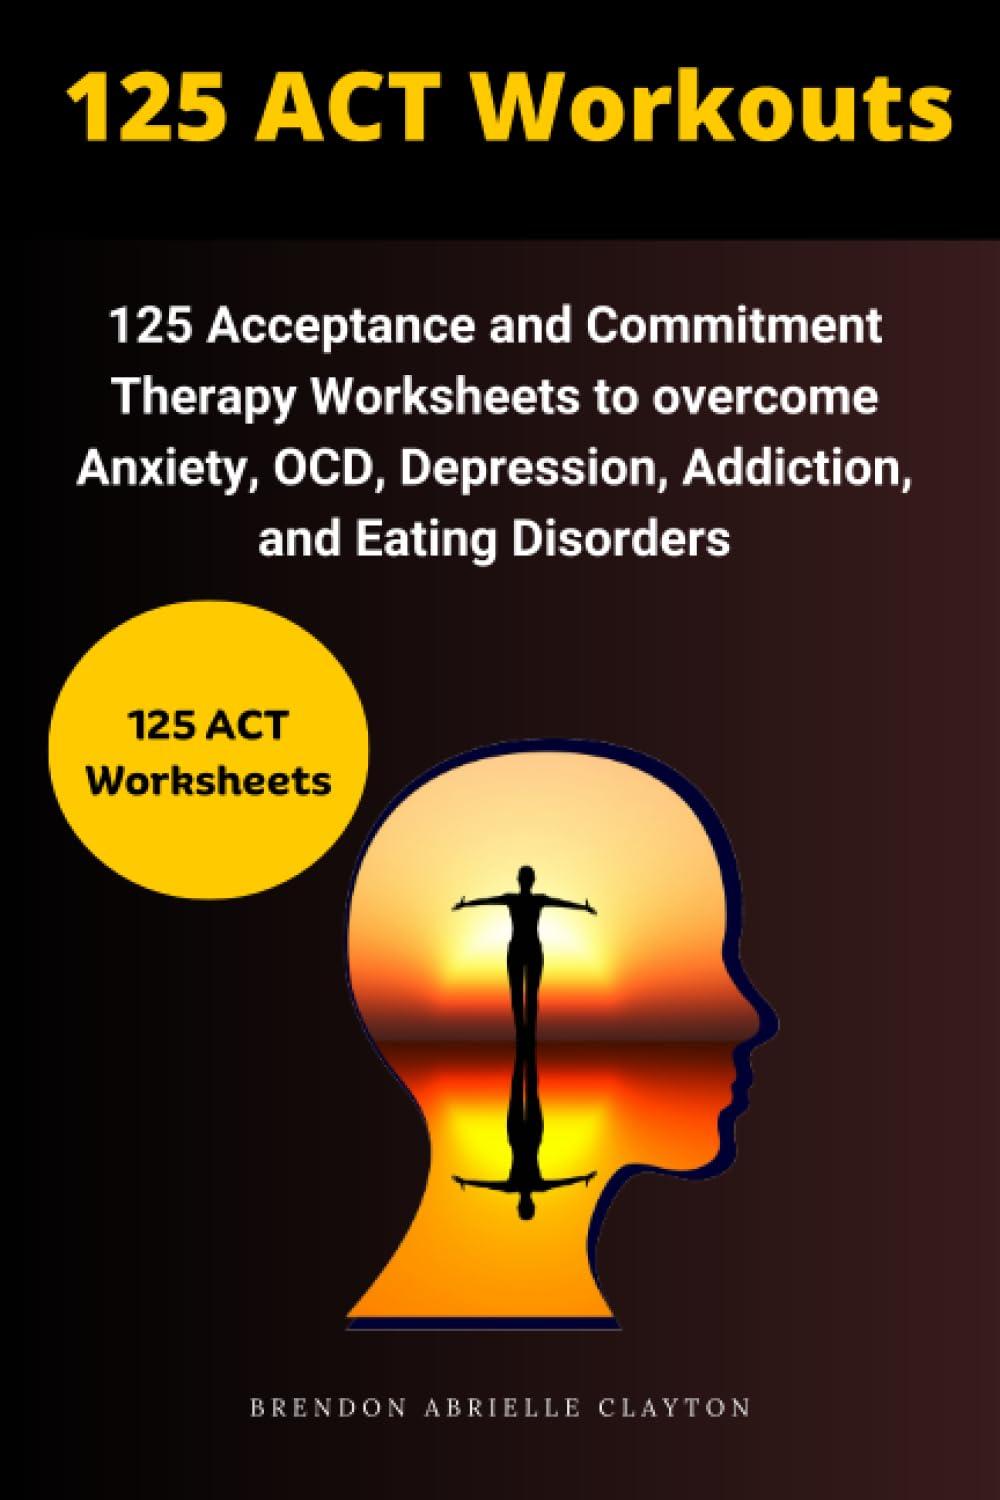 125 act workouts 125 acceptance and commitment therapy worksheets to overcome anxiety ocd depression